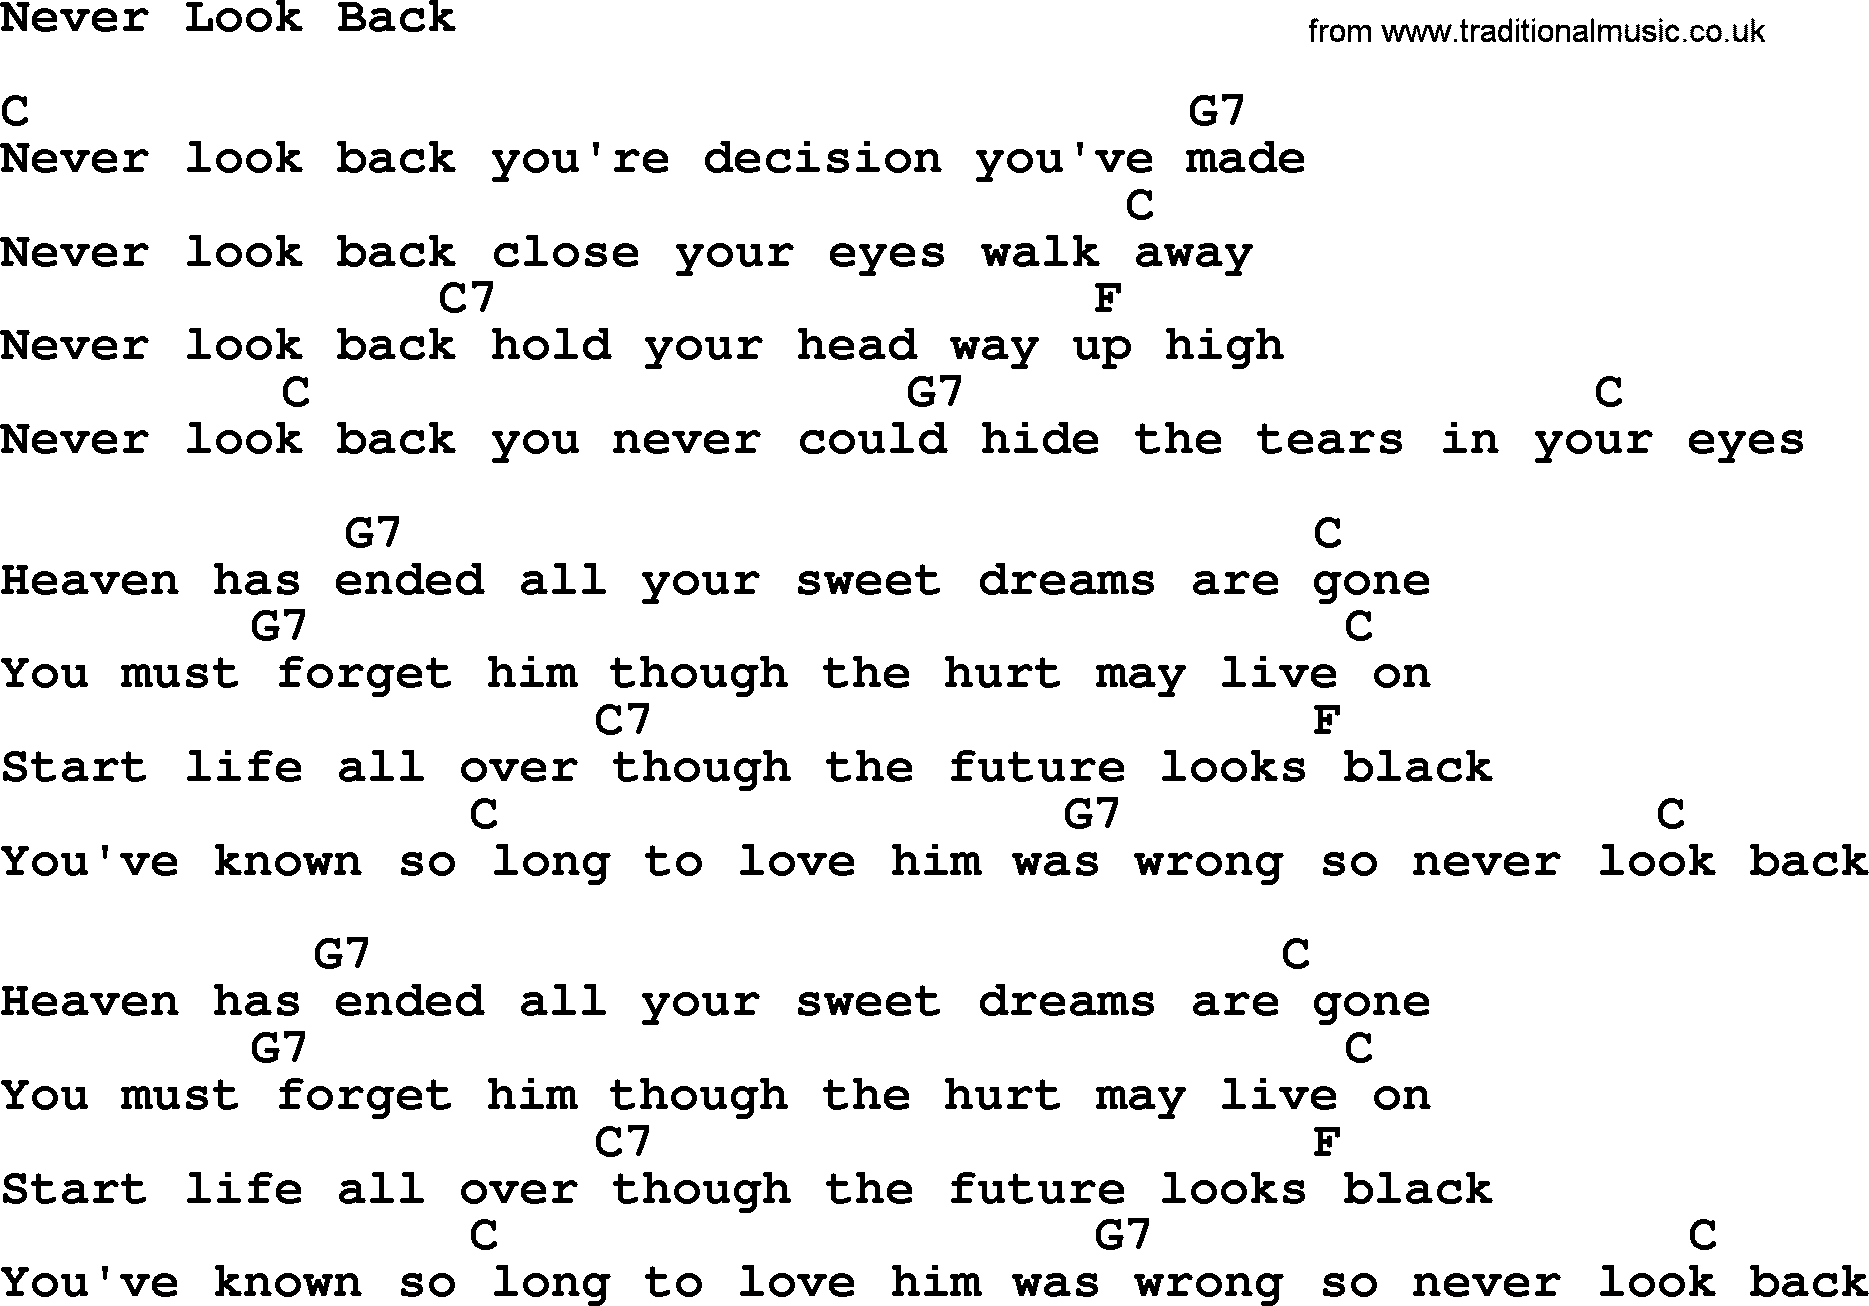 Marty Robbins song: Never Look Back, lyrics and chords